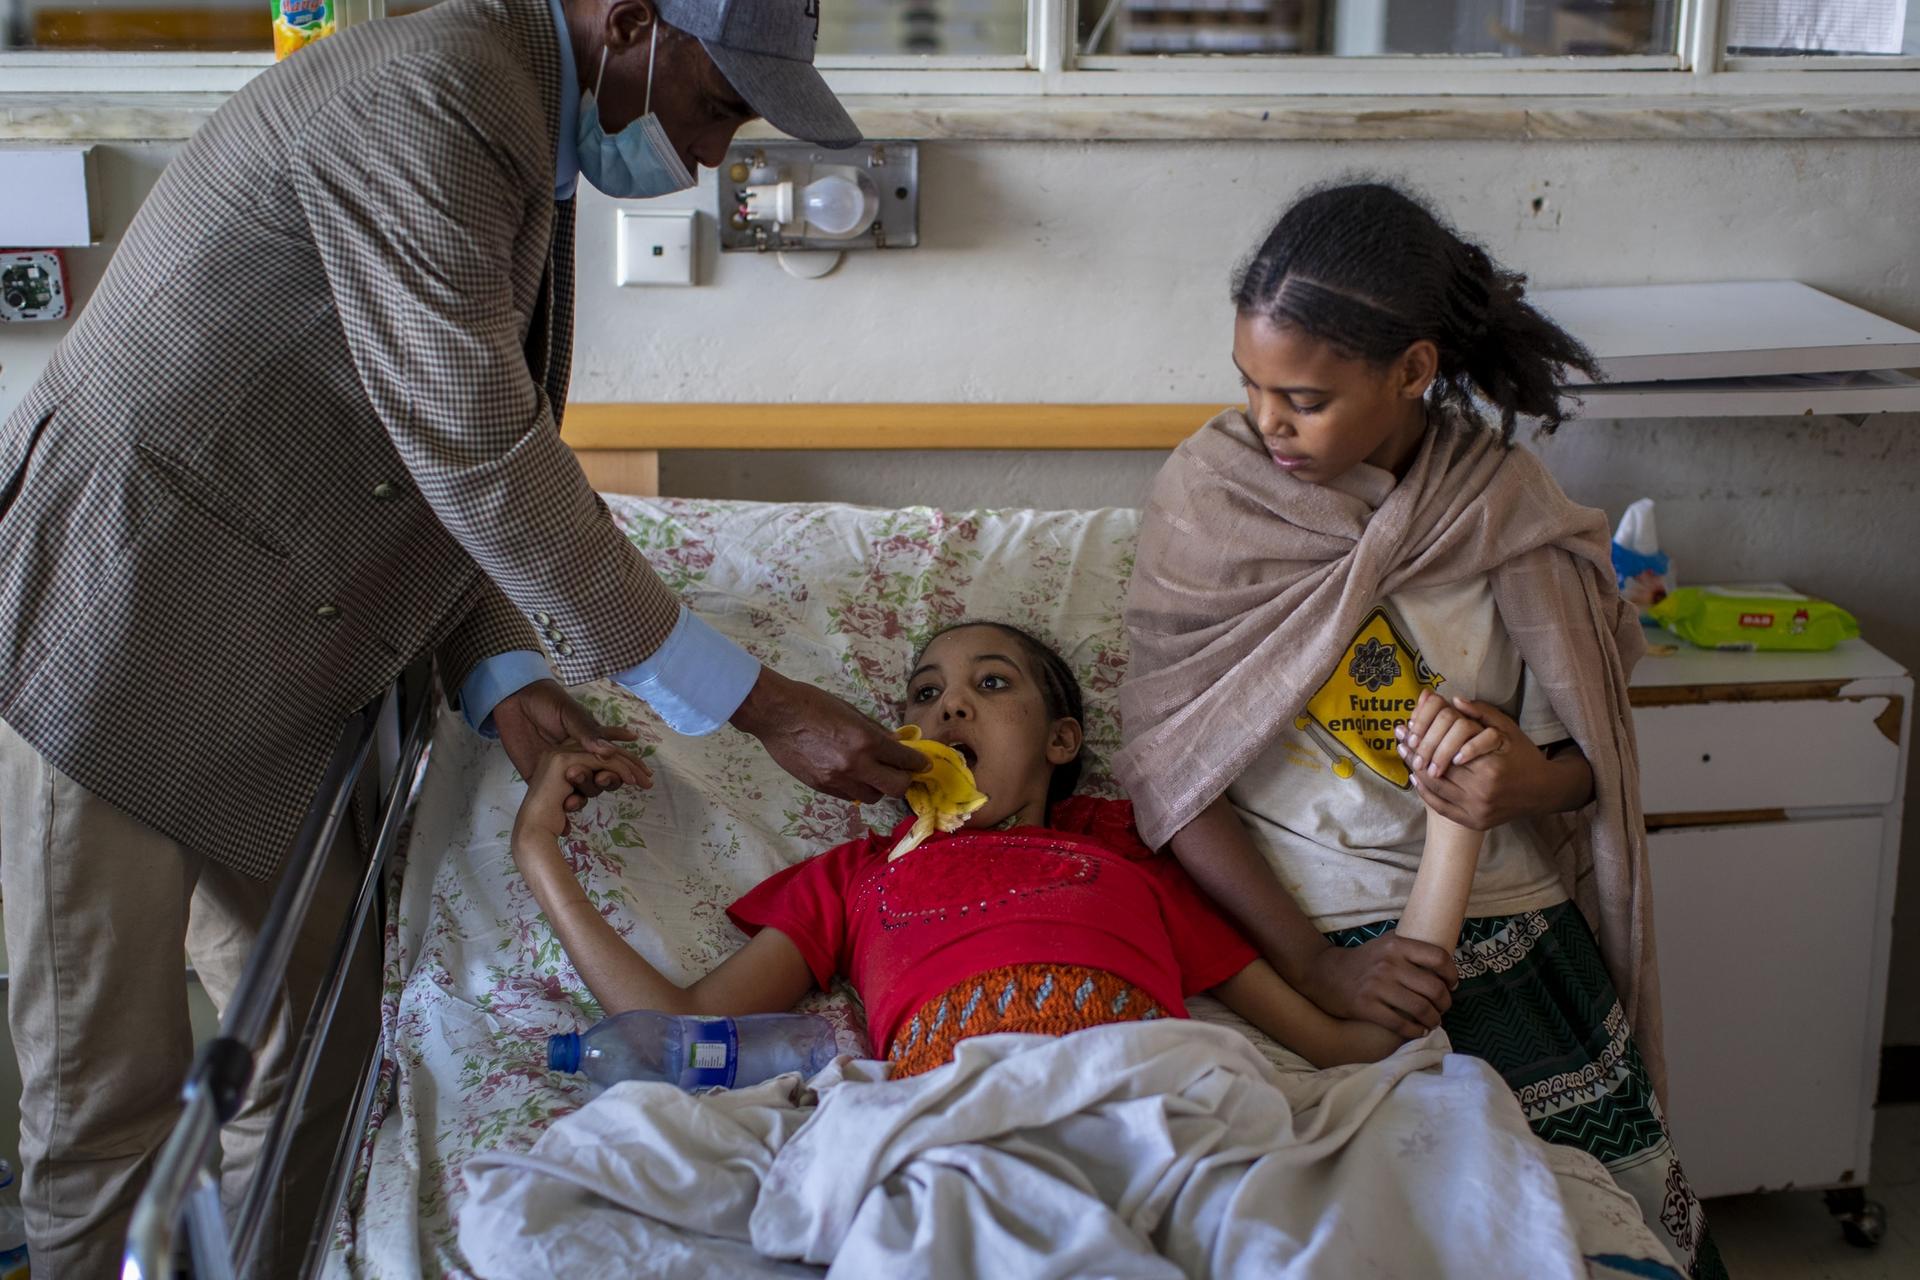 A girl in red rests on bed with her father and sister helping her. 